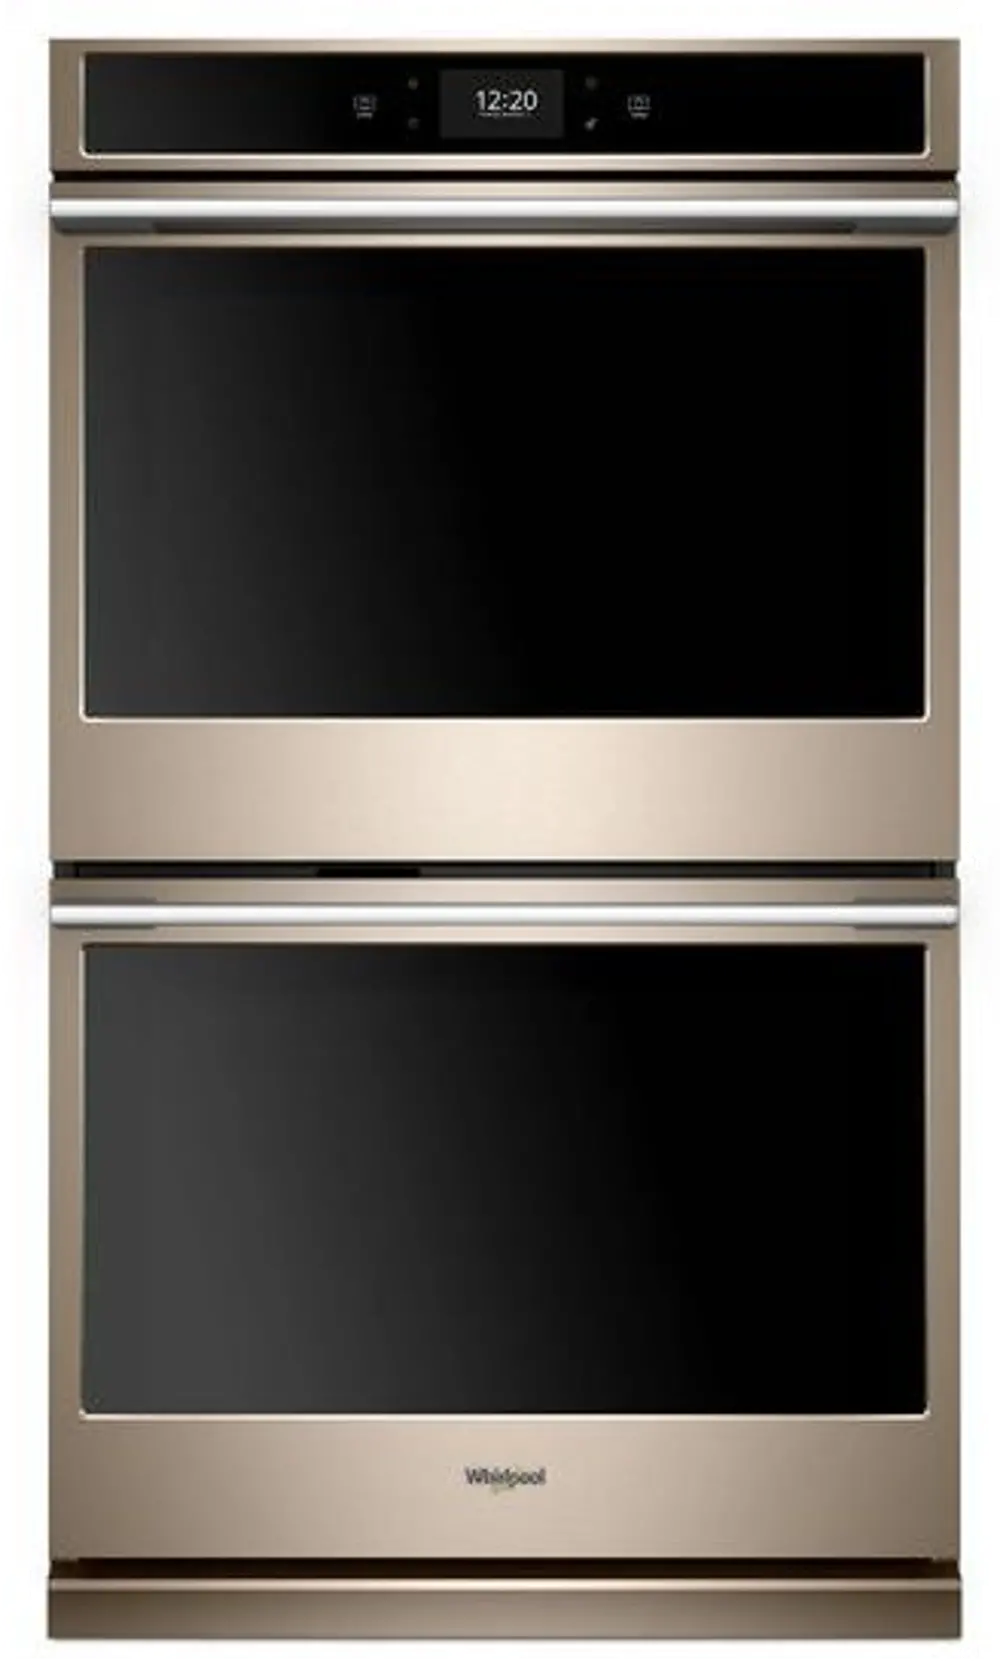 WODA7EC0HN Whirlpool 30 Inch Smart Double Wall Oven with Convection - 10.0 cu. ft. Sunset Bronze-1